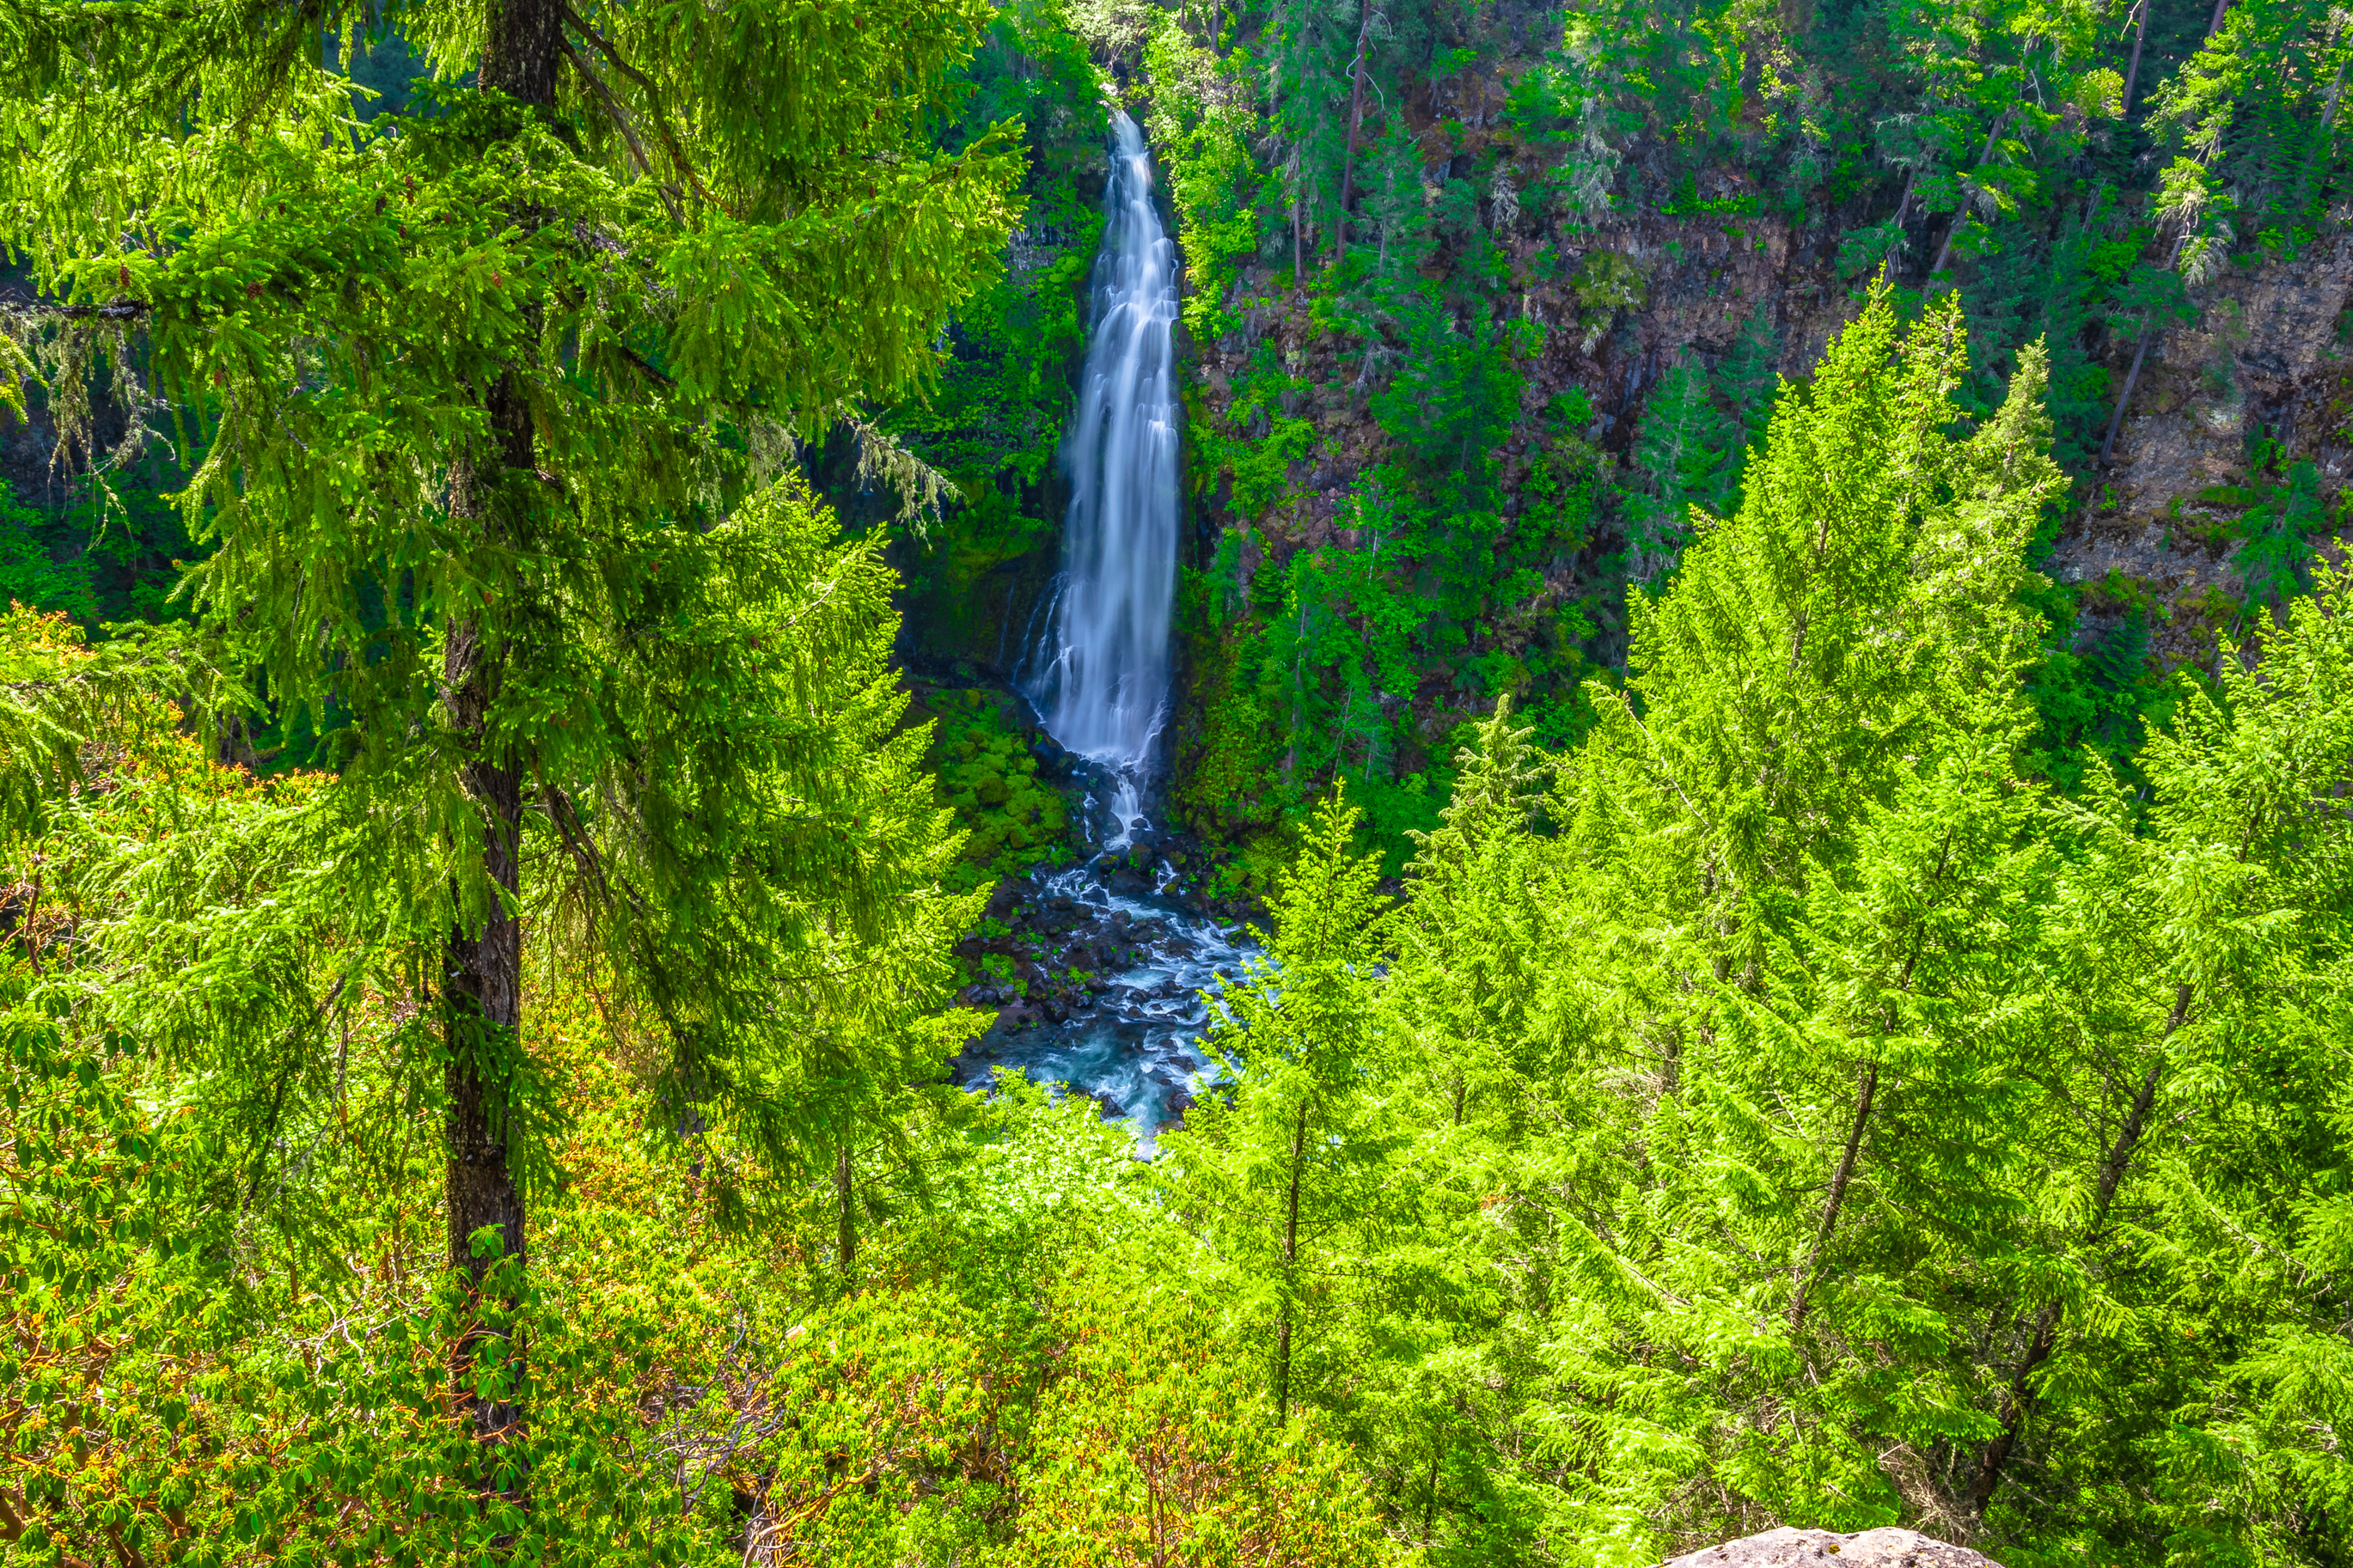 WATERFALLS NEAR MEDFORD & THE ROGUE VALLEY